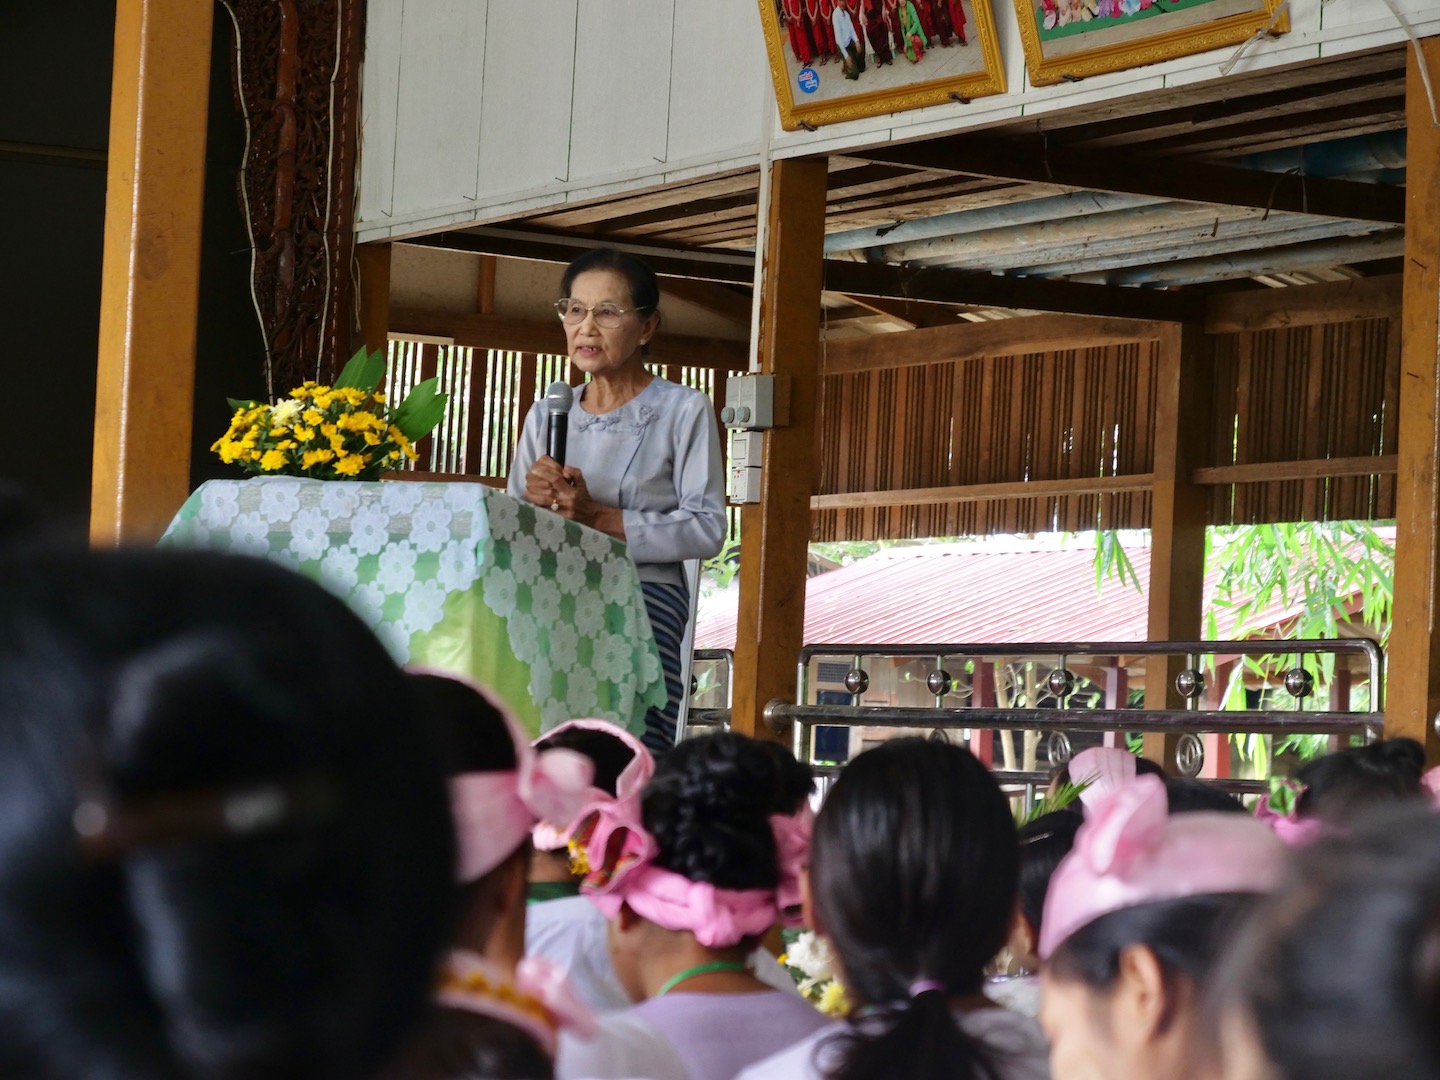 Daw Khin Pyone, a long-time advocate for Shan-ni culture and author of numerous Shan-ni educational texts, addressing the graduating class.